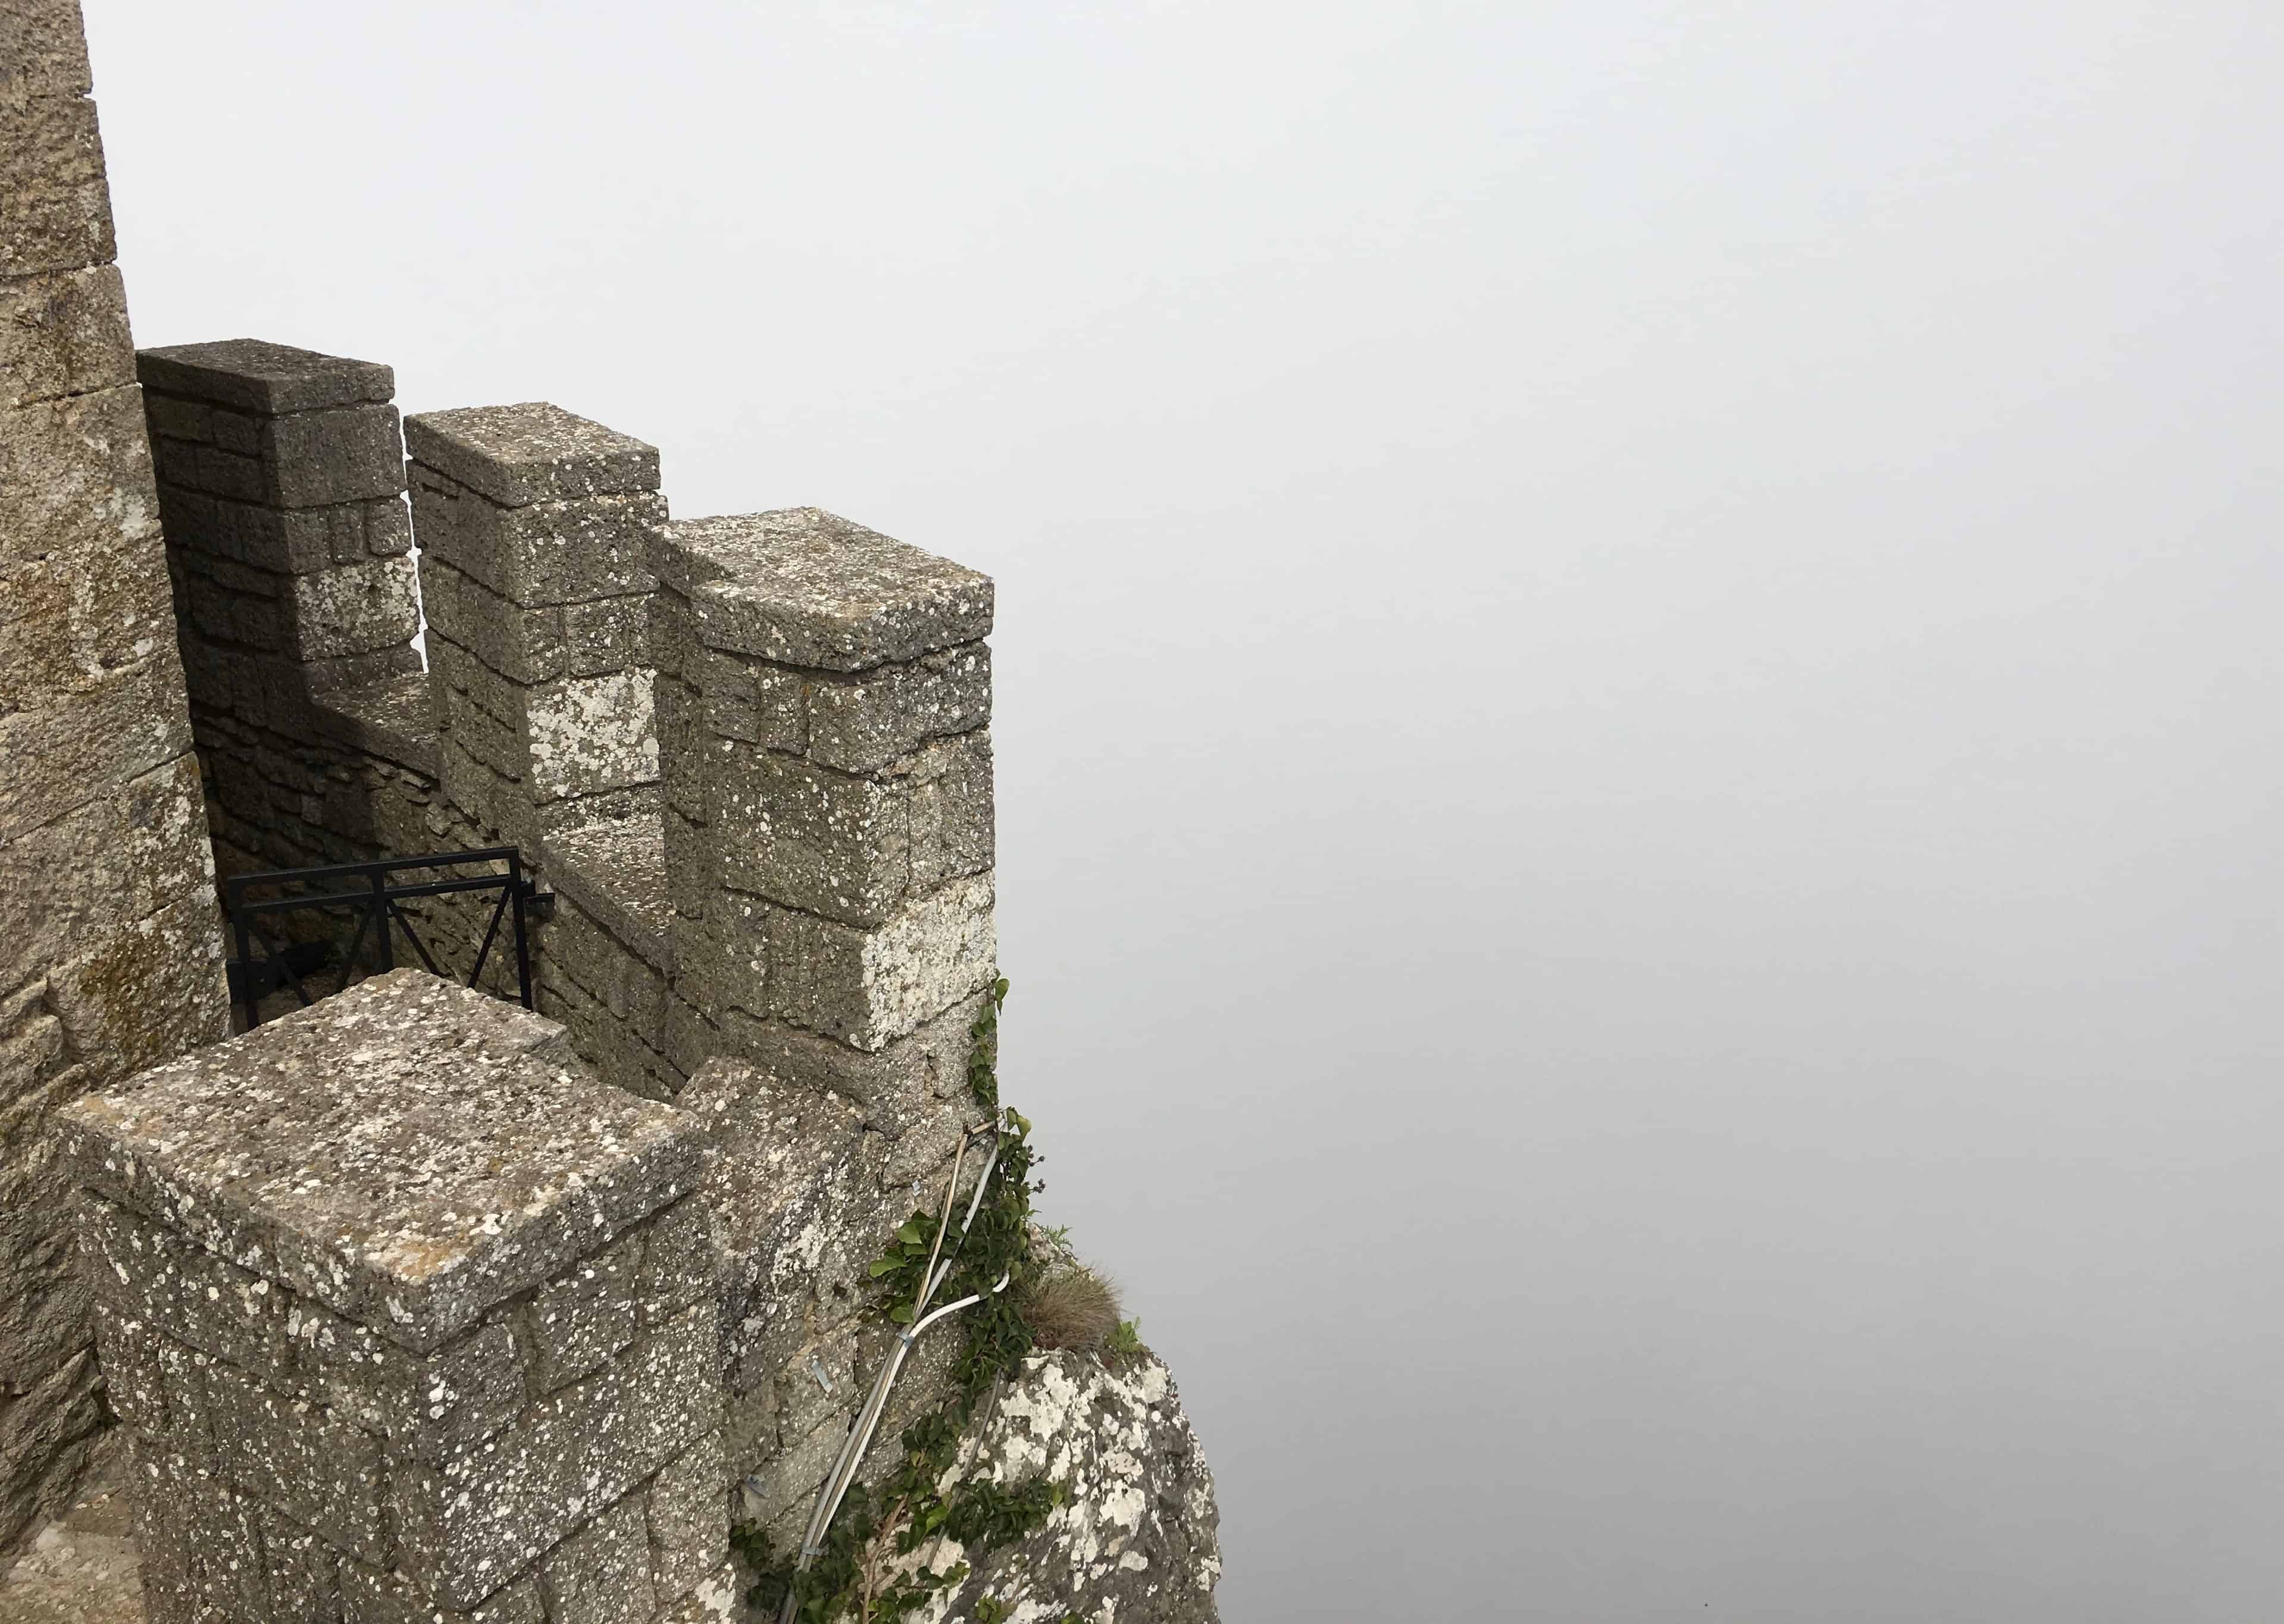 Mist shrouds the sheer drop from the walls of the Guaita fortress, San Marino